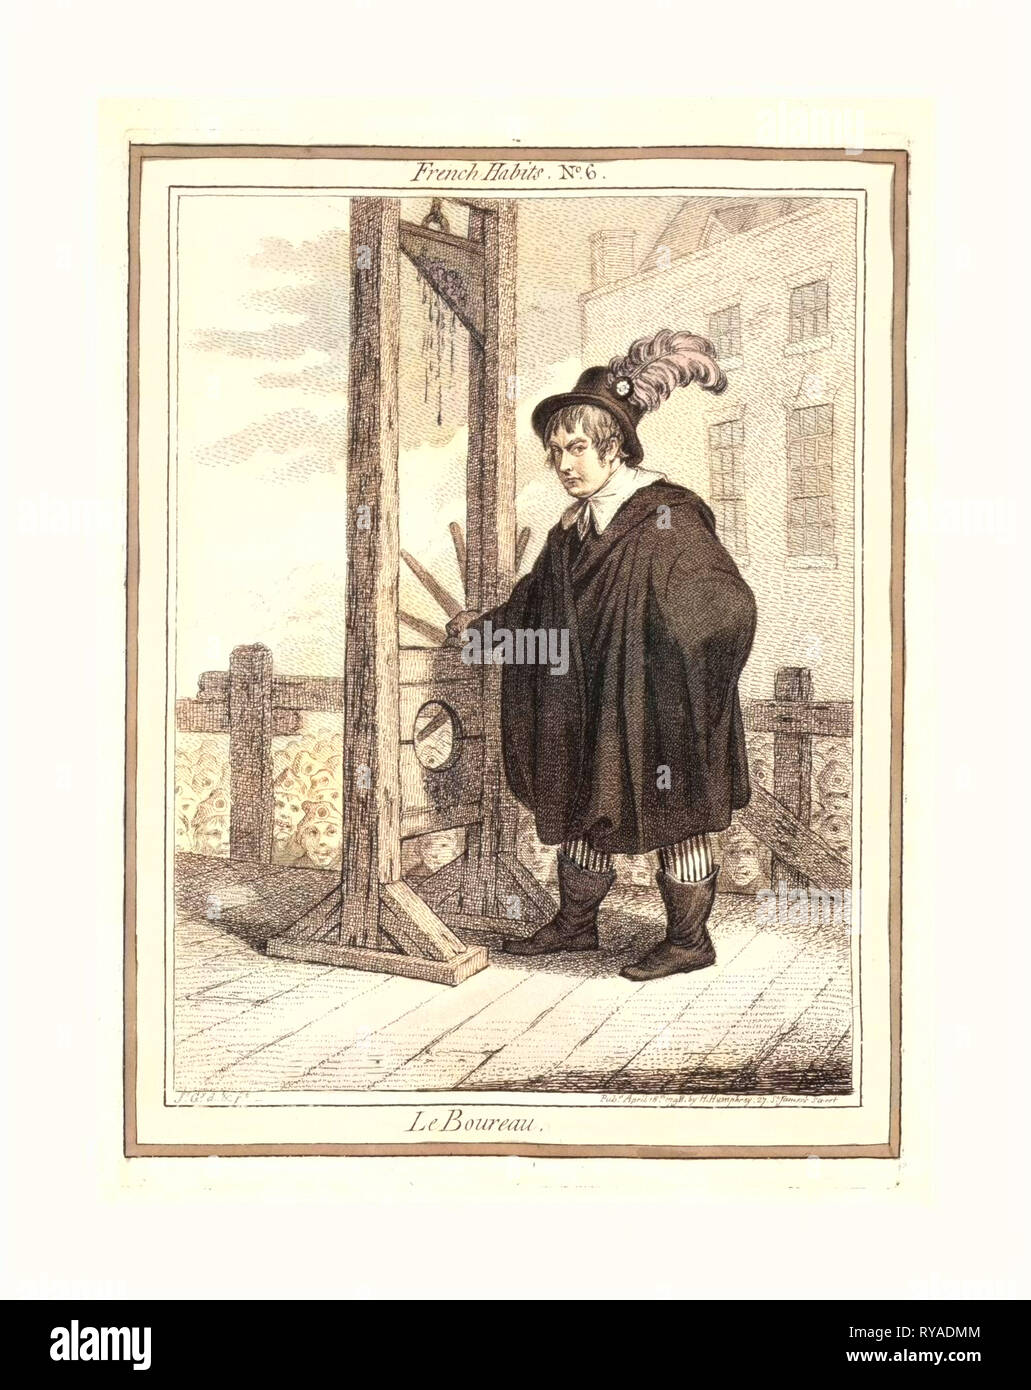 Le Boureau, Gillray, James, 1756-1815, Engraving 1798, George Tierney Dressed As an Executioner Standing Next to a Guillotine with a Crowd of Liberty-Capped Citizens in the Background Stock Photo